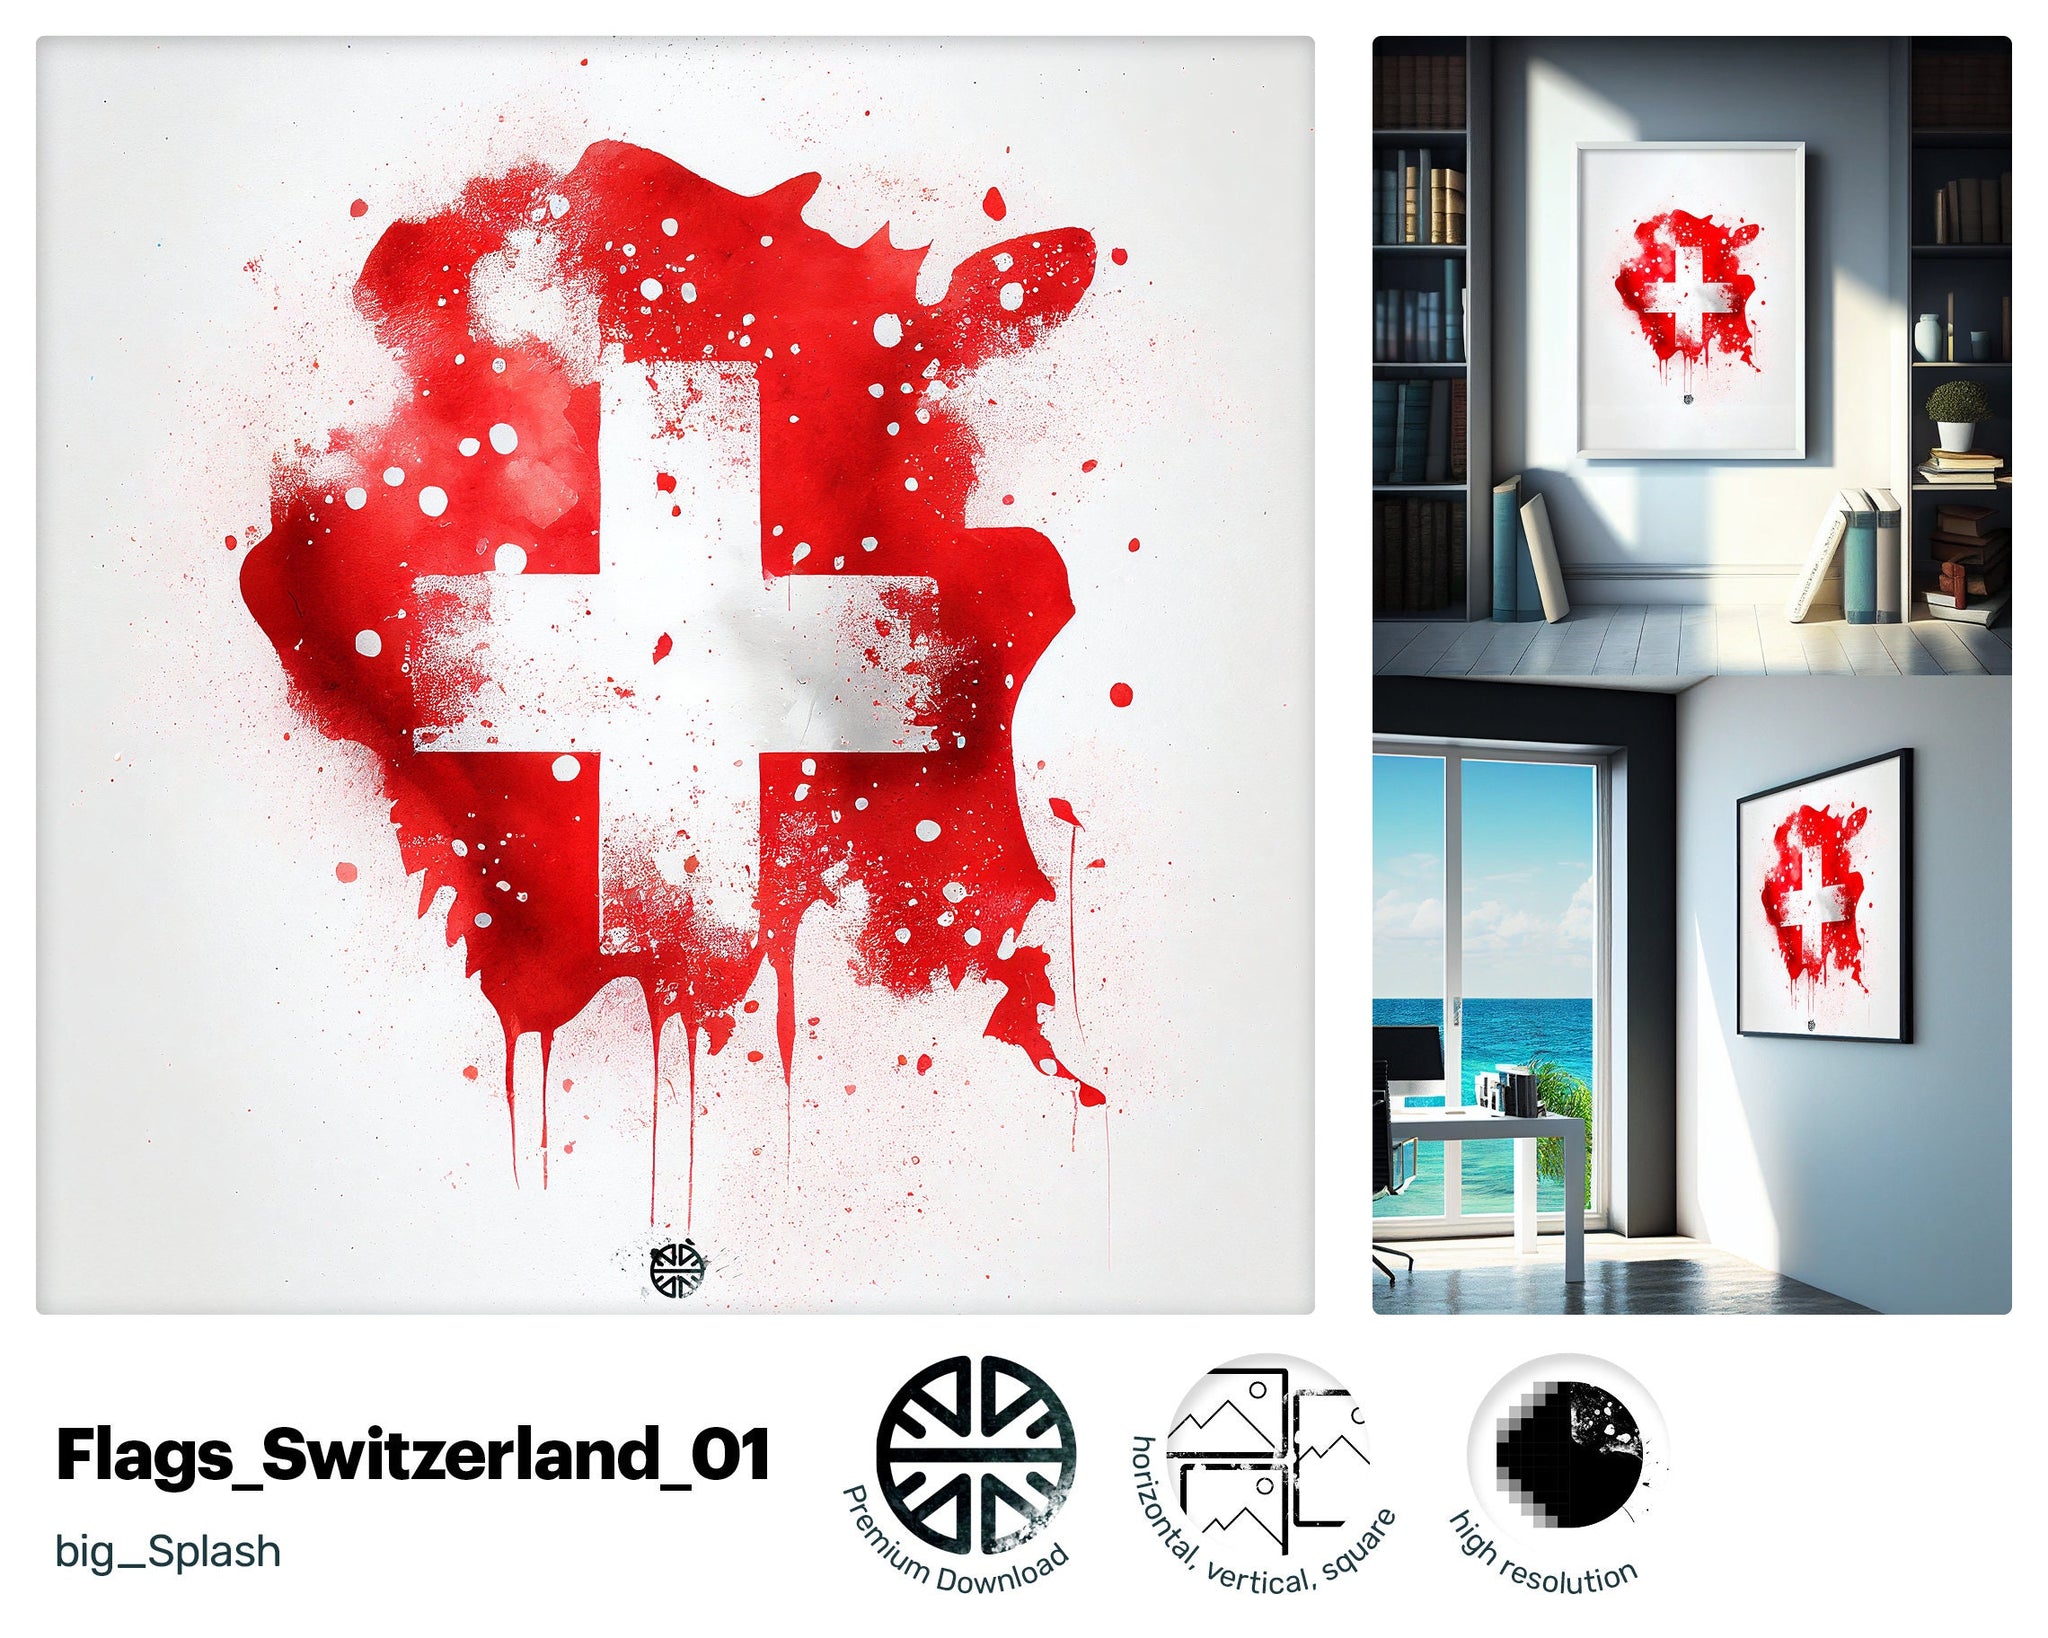 Loyal Elegant Swiss flag, Hilarious Lovely Canvas, Sumptuous Charming Glitzy Drawn Intriguing Decoration